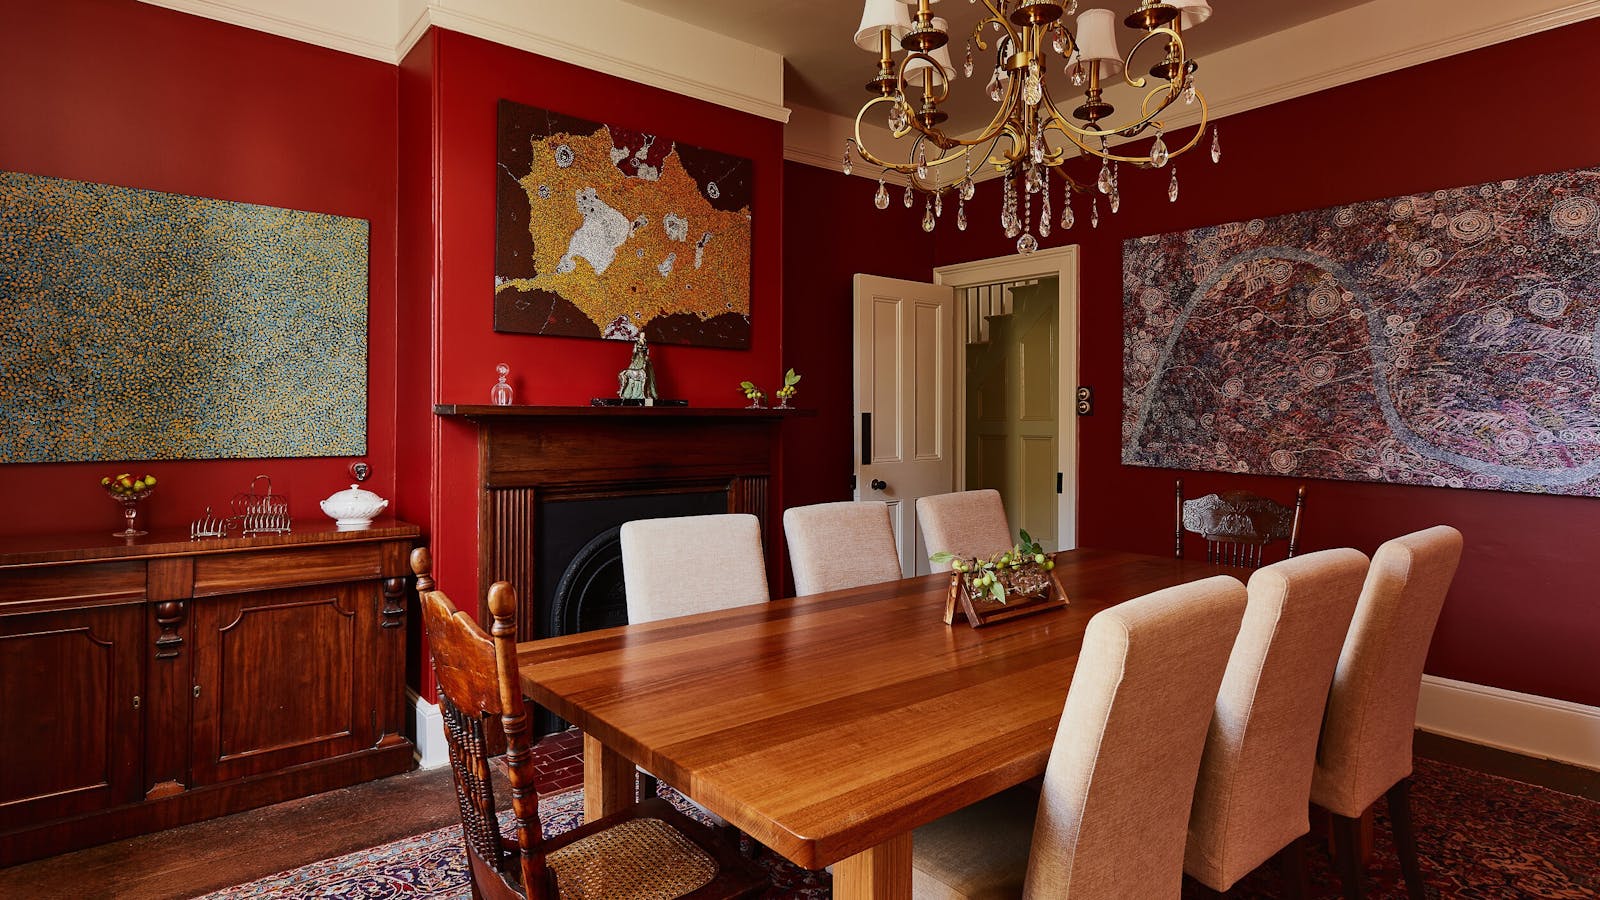 In the shared dining room, guests can enjoy a remarkable dining experience.